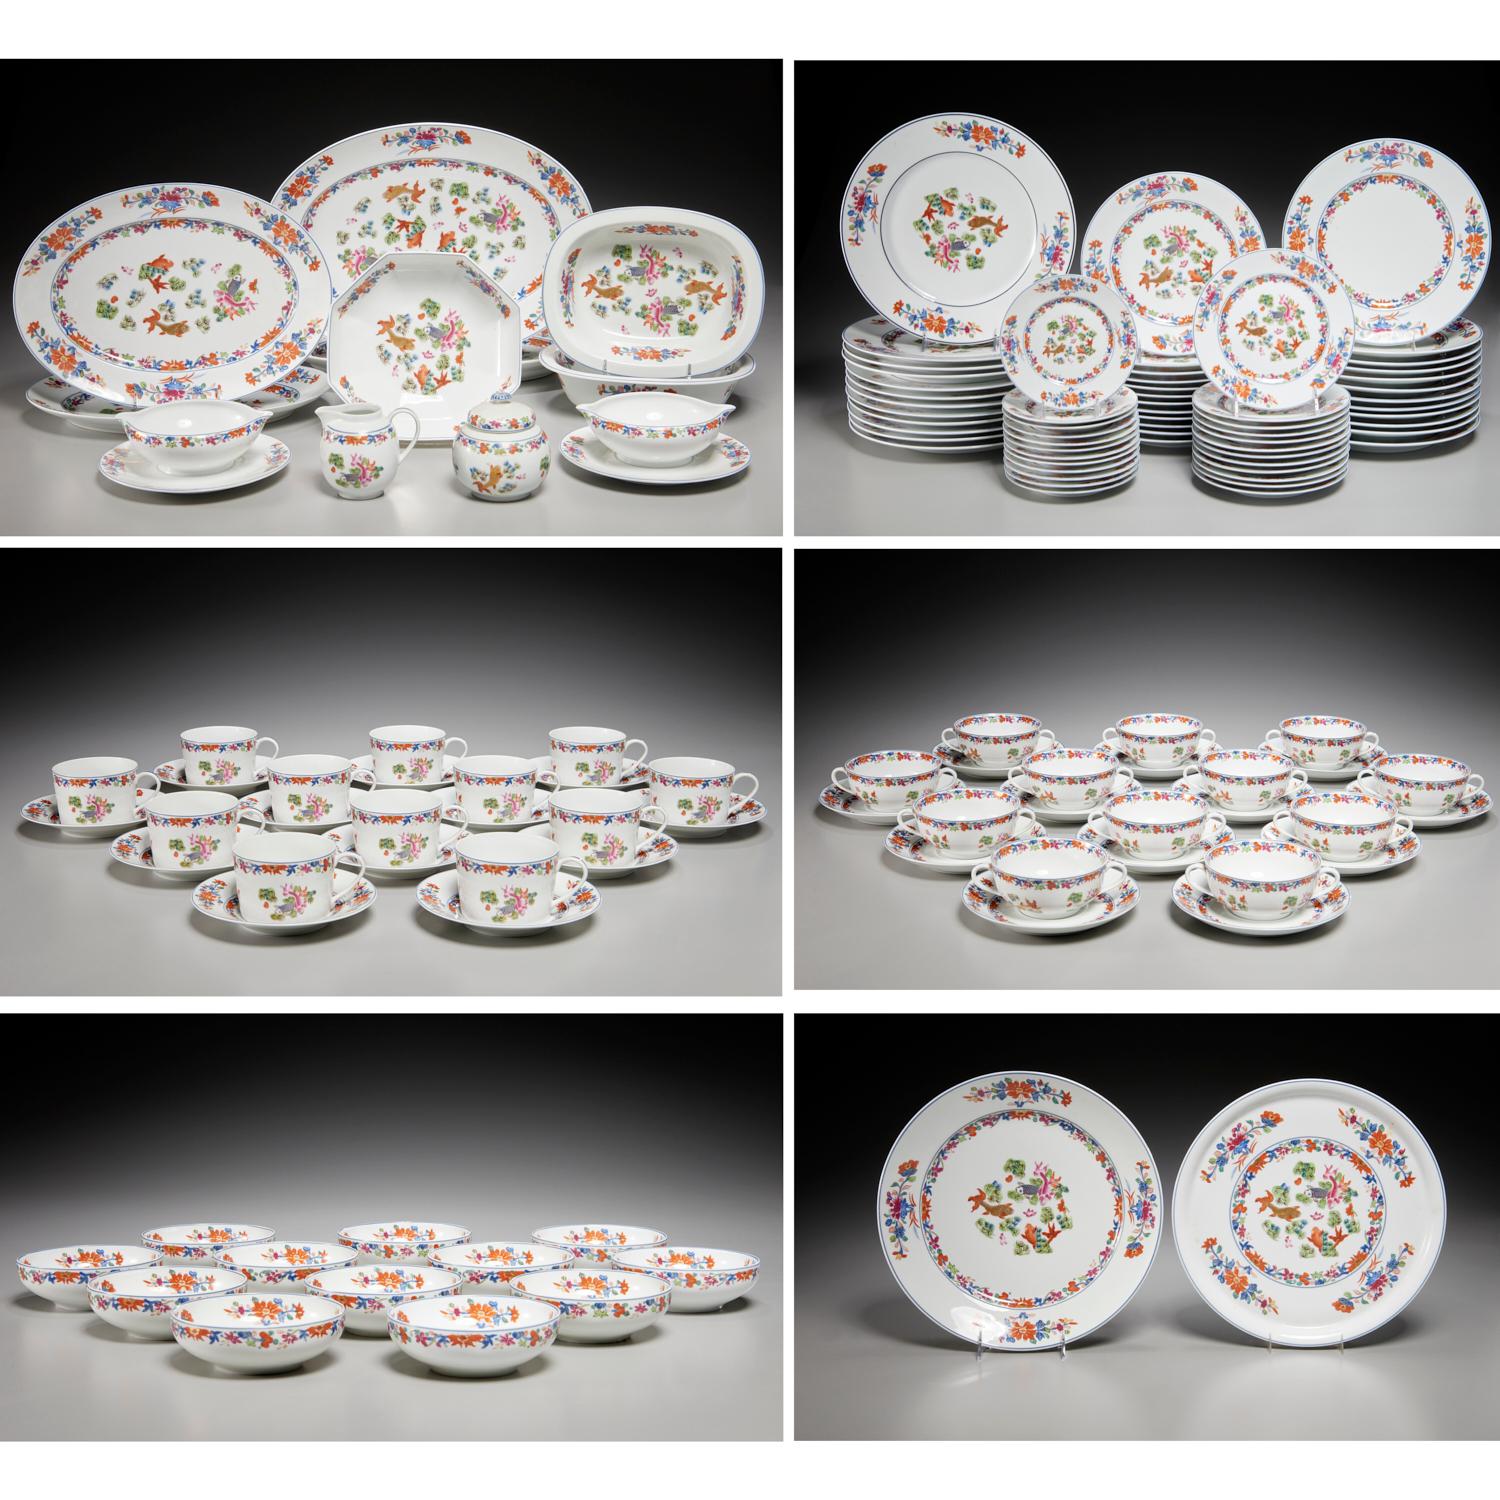 133 Piece House of Puiforcat Kiang She Dinner Service for 12 by Limoges, France For Sale 6